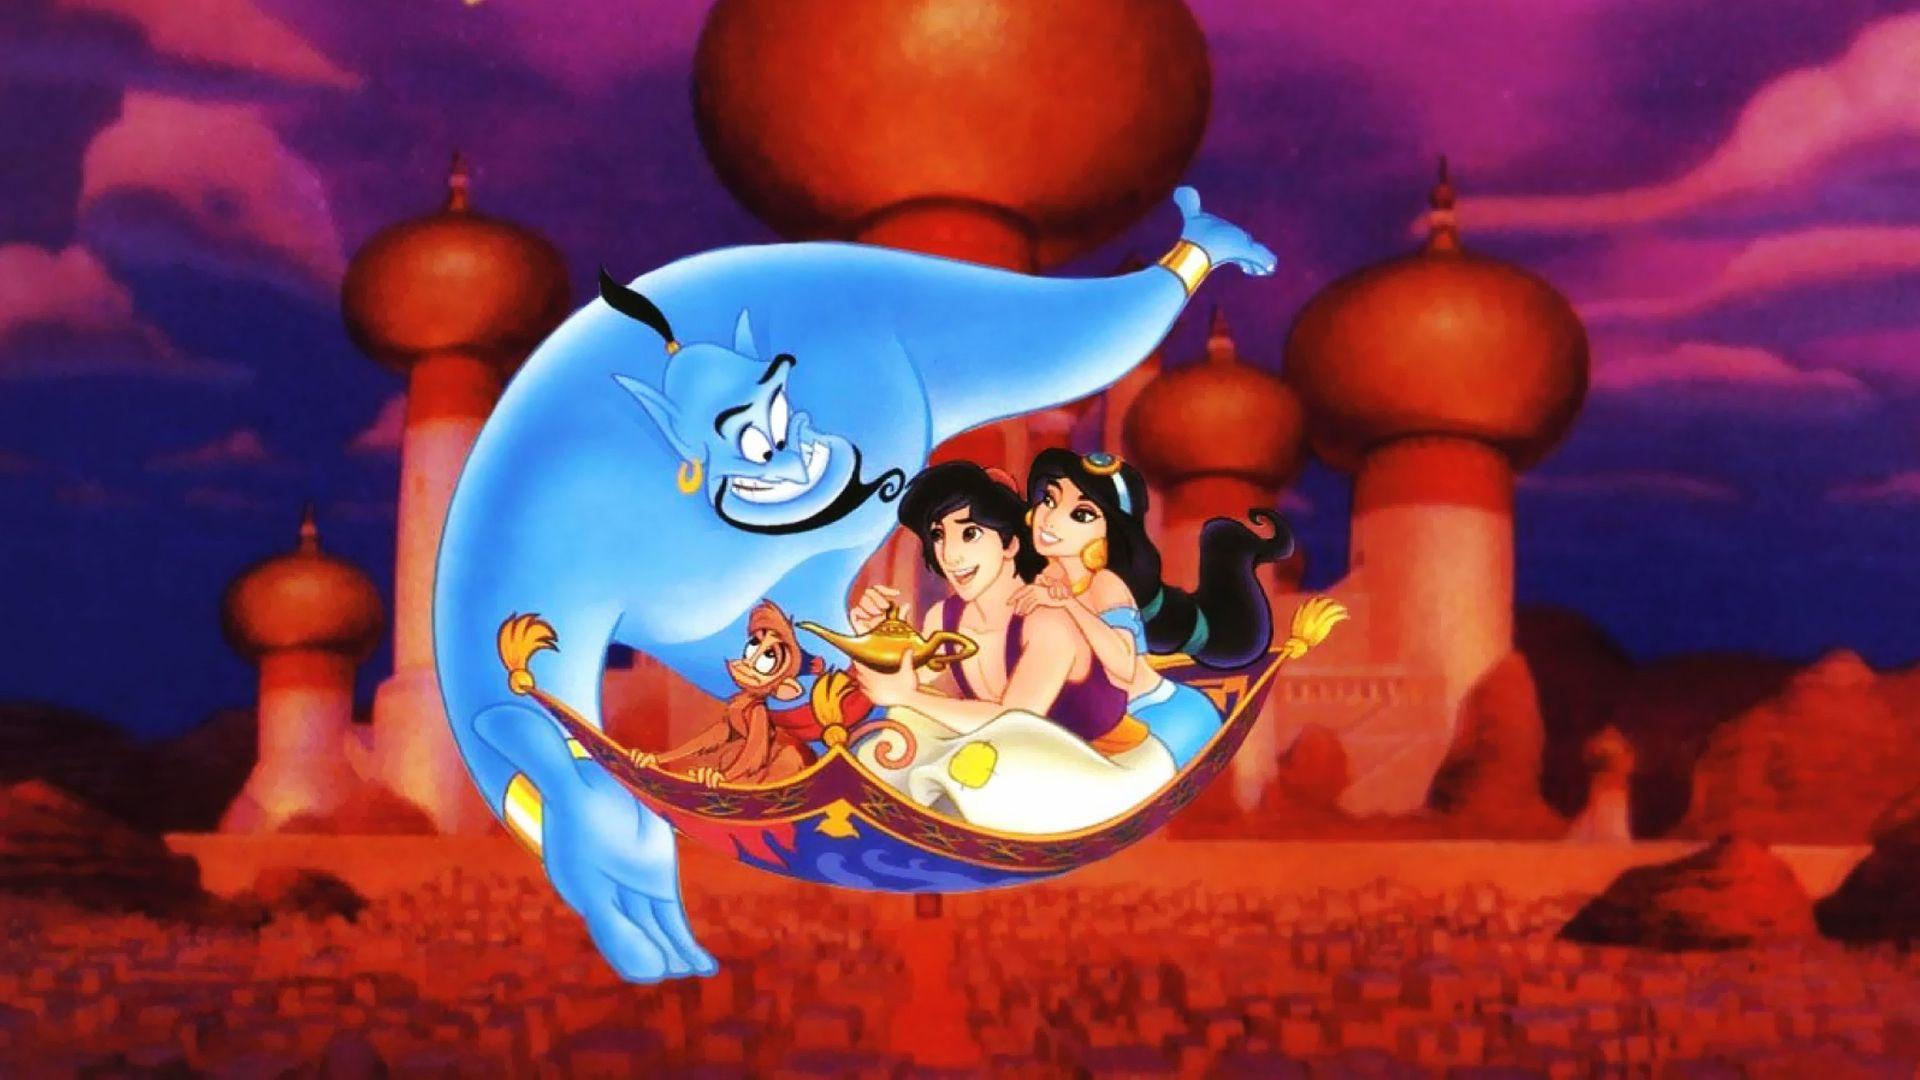 hd aladdin wallpapers amazing image cool backgrounds photos 1080p